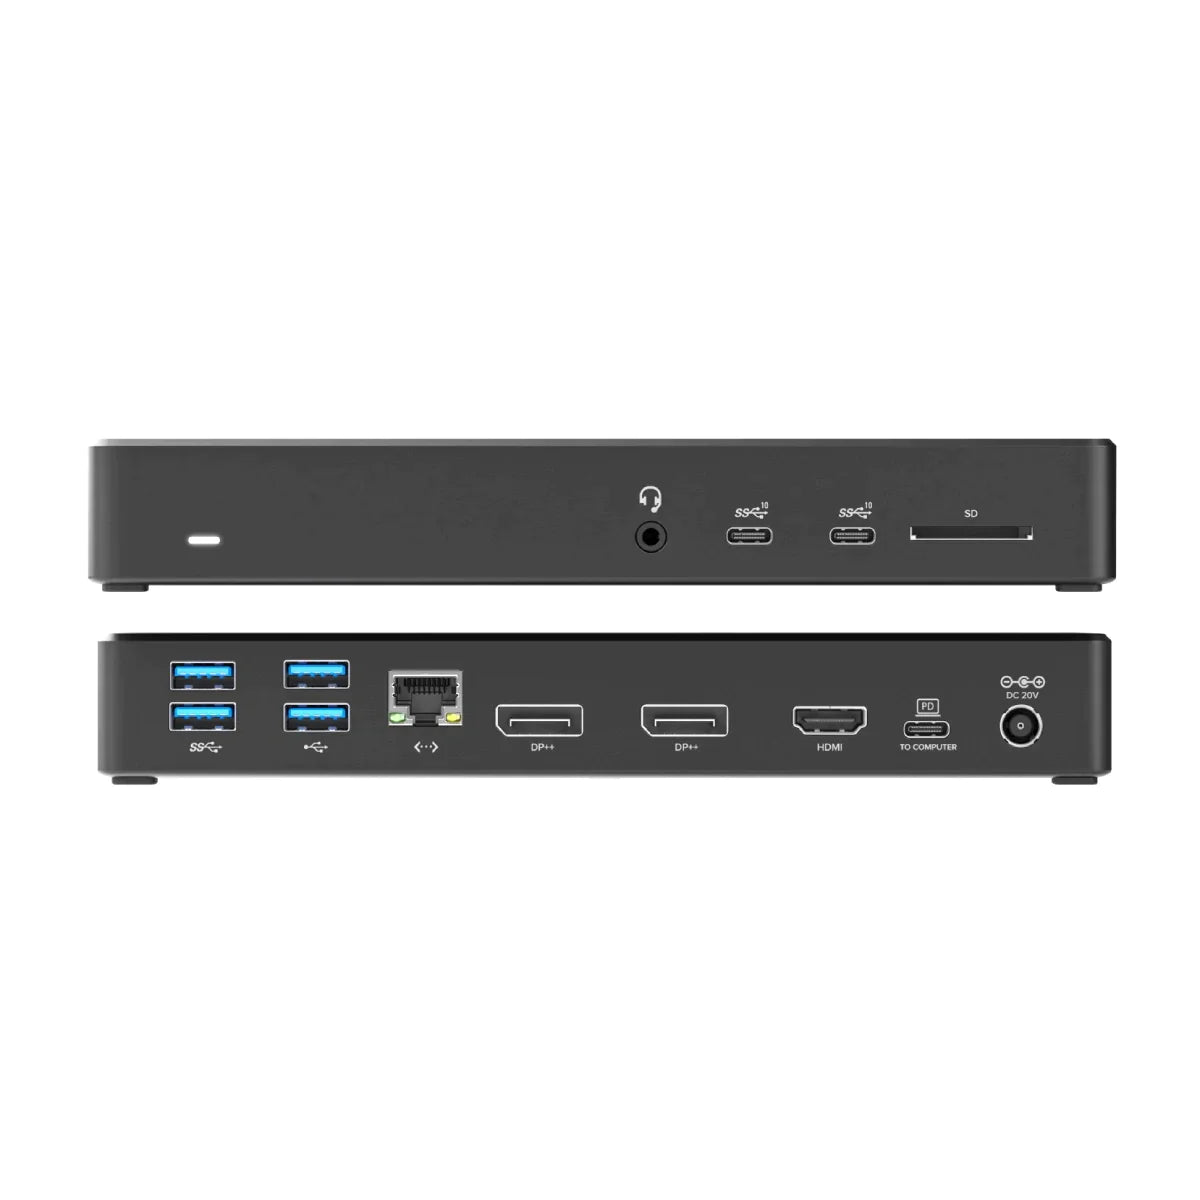 usb-c-triple-display-dp-alt-mode-docking-station-ma3-with-100w-power-delivery-laptop-charging-2-x-dp-and-1-x-hdmi-with-up-to-4k-60hz-support2